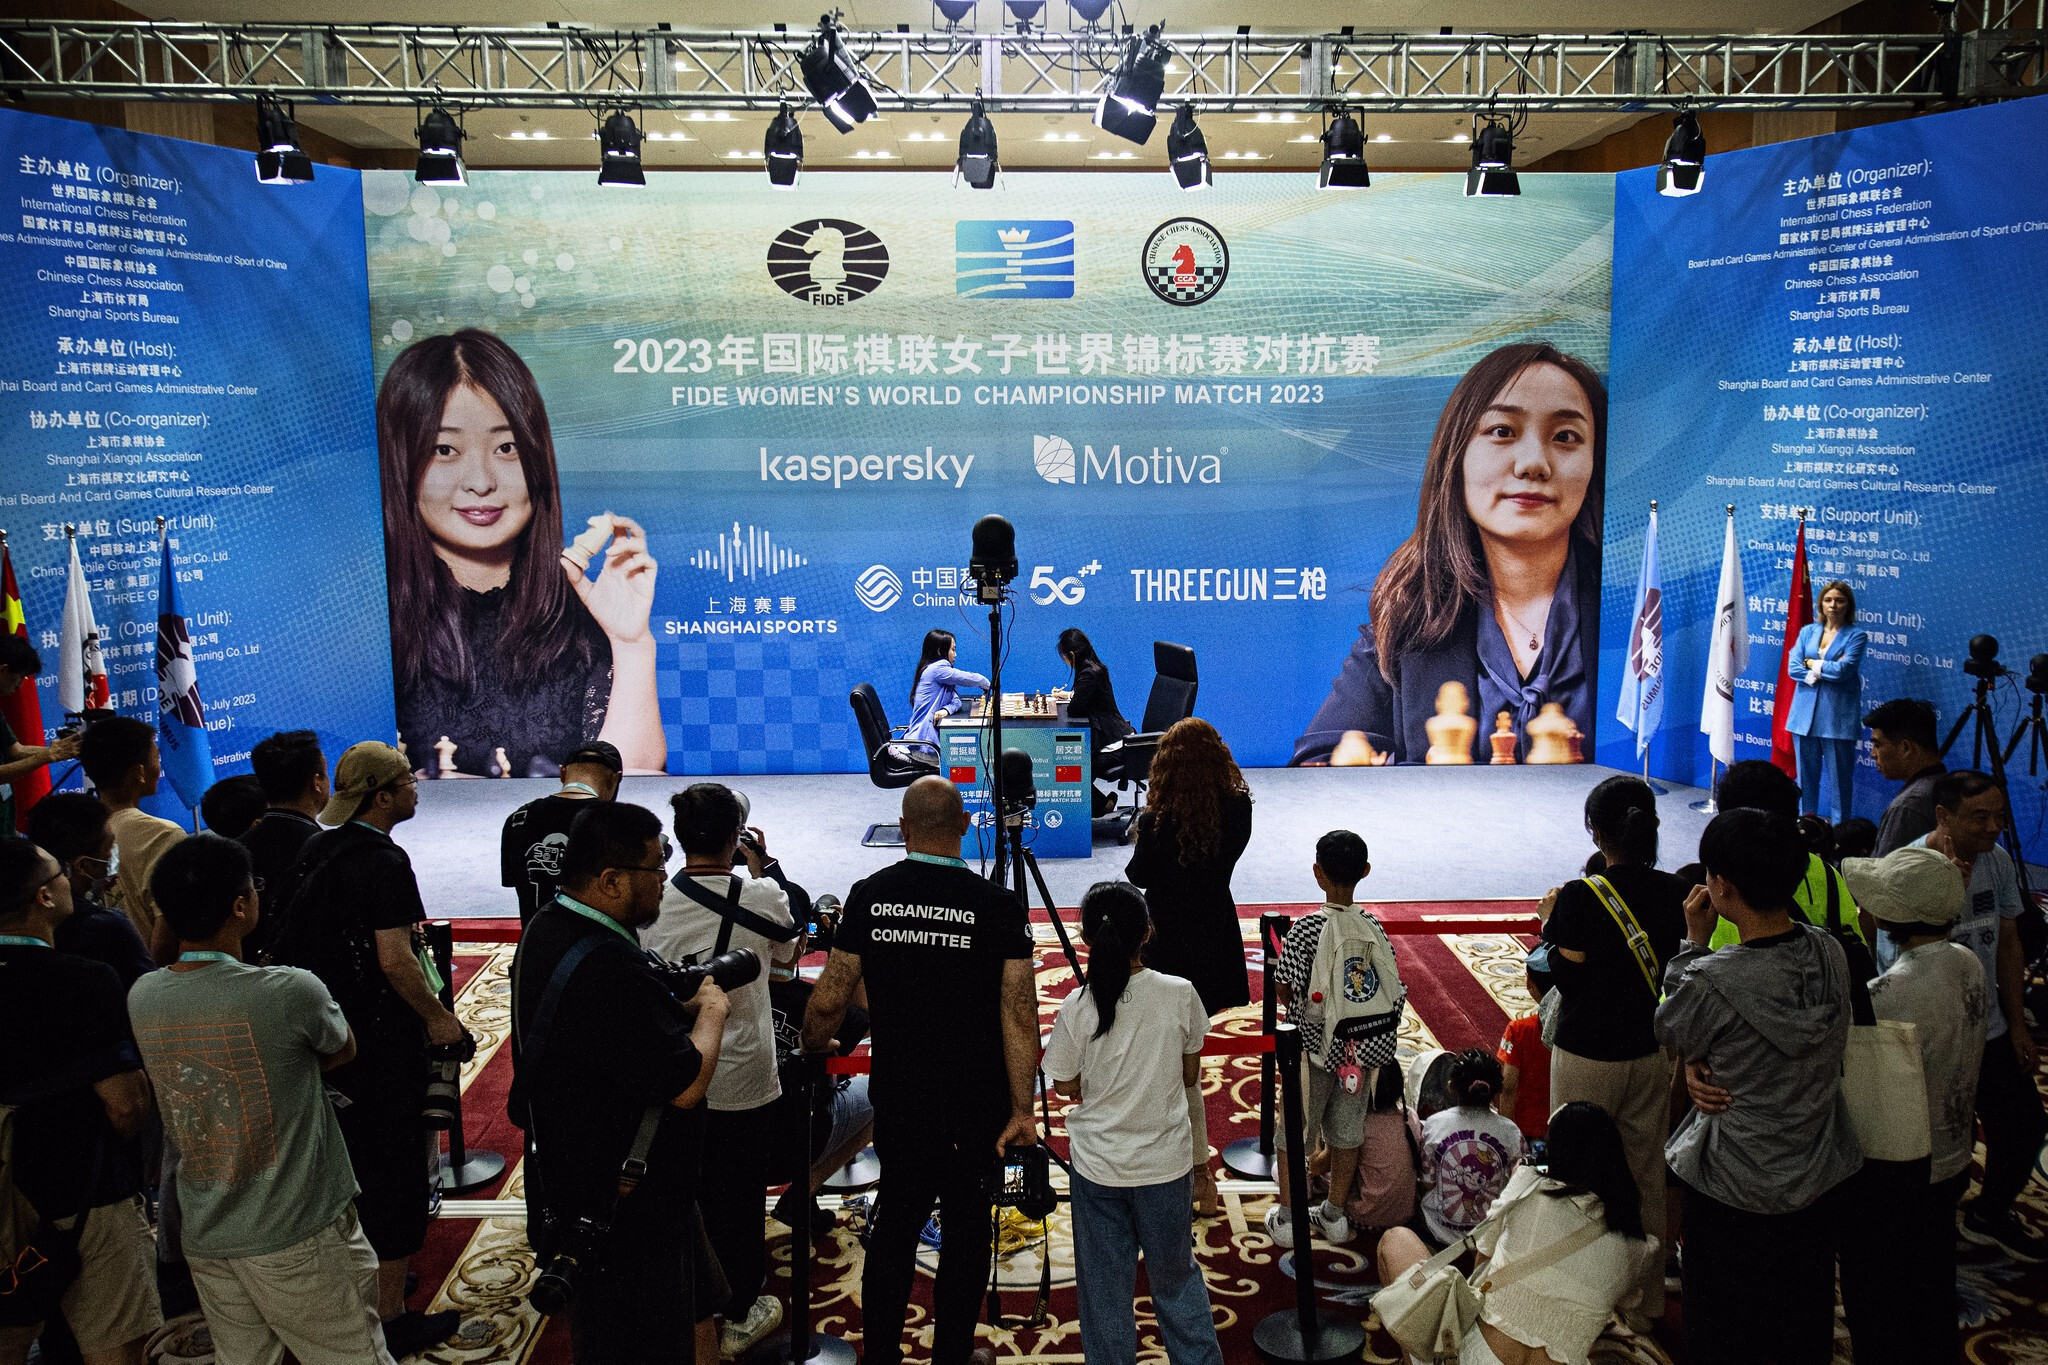 First game of FIDE Women’s World Championship Match ends in draw